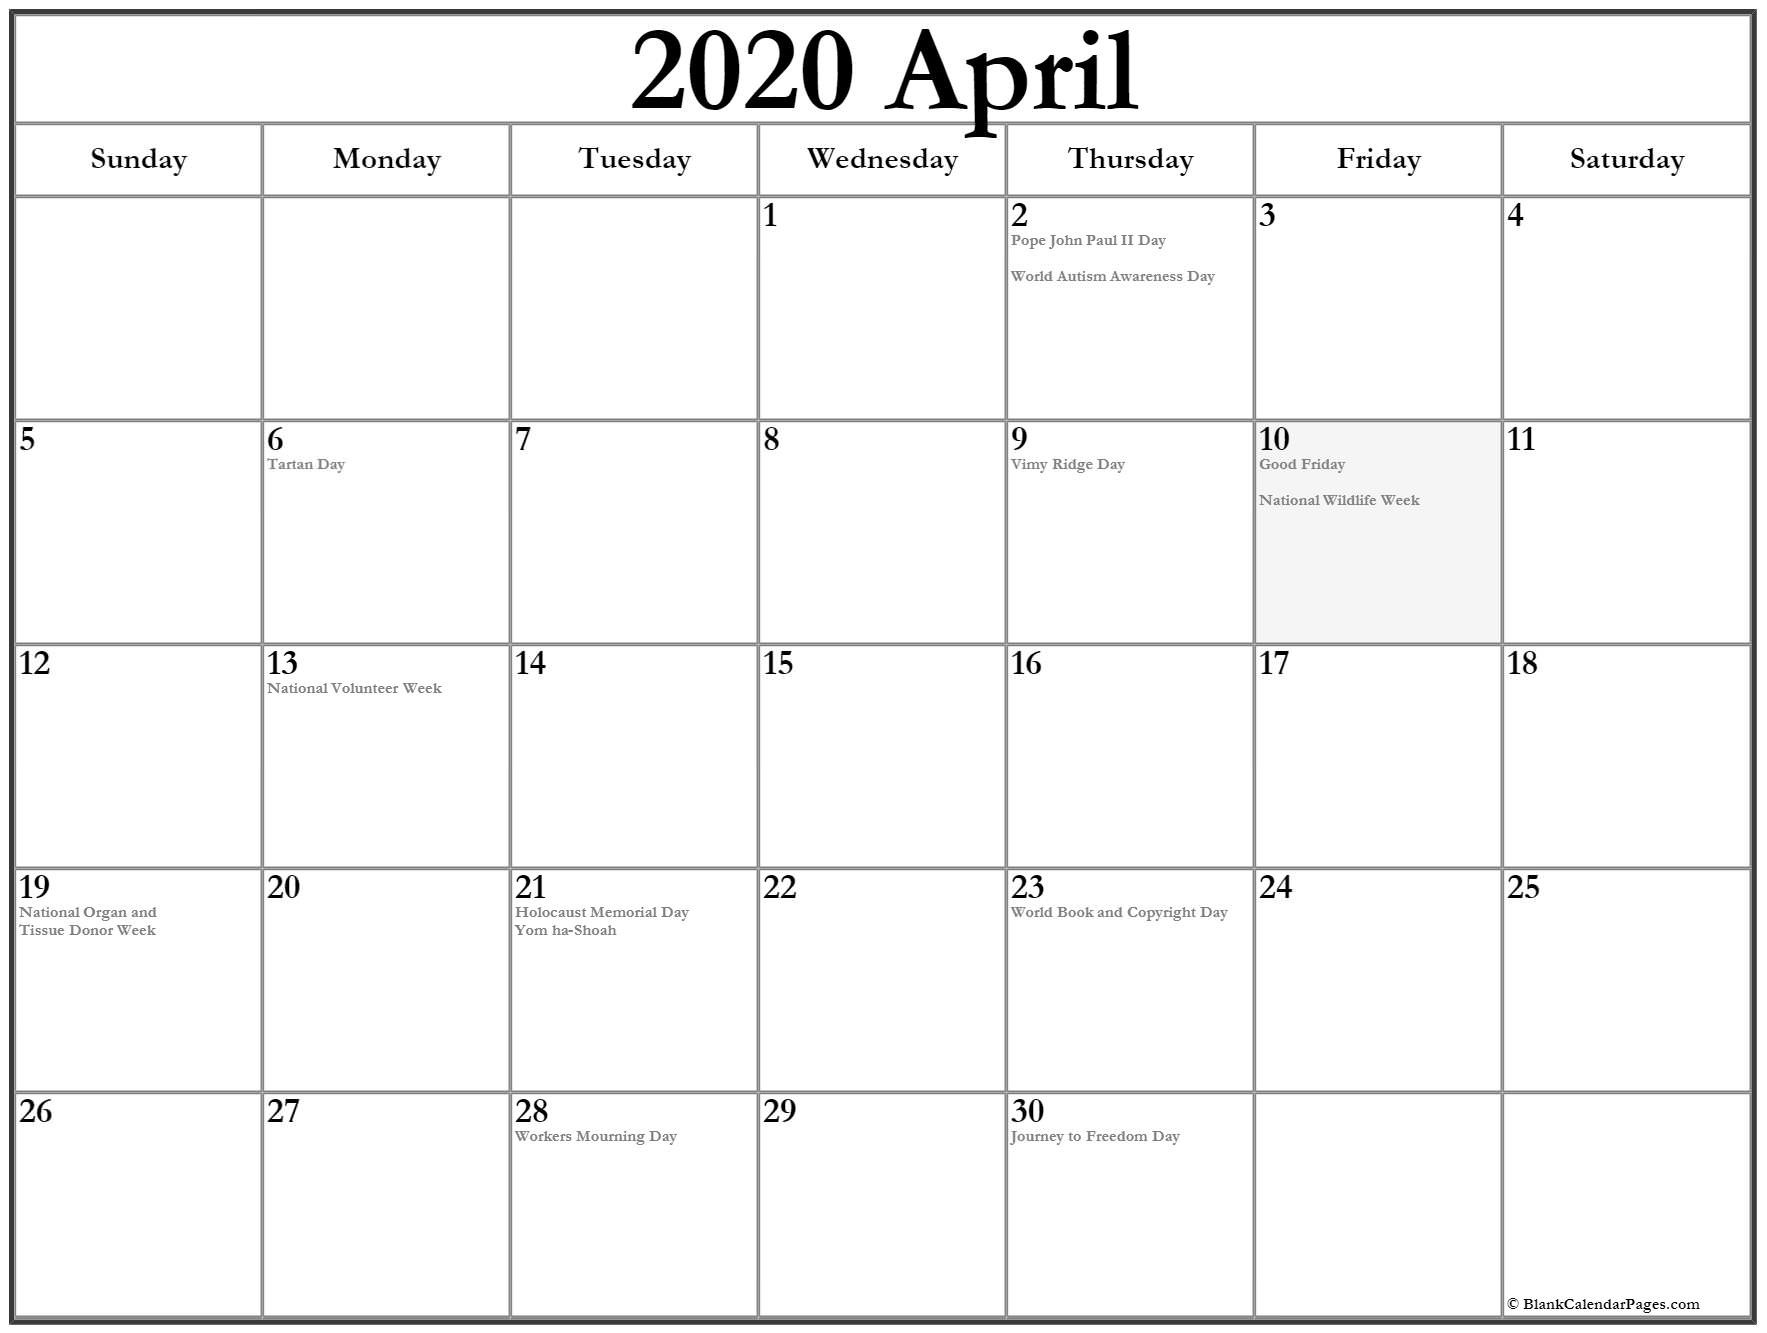 Collection Of April 2020 Calendars With Holidays-2020 Calendar With Religious Holidays